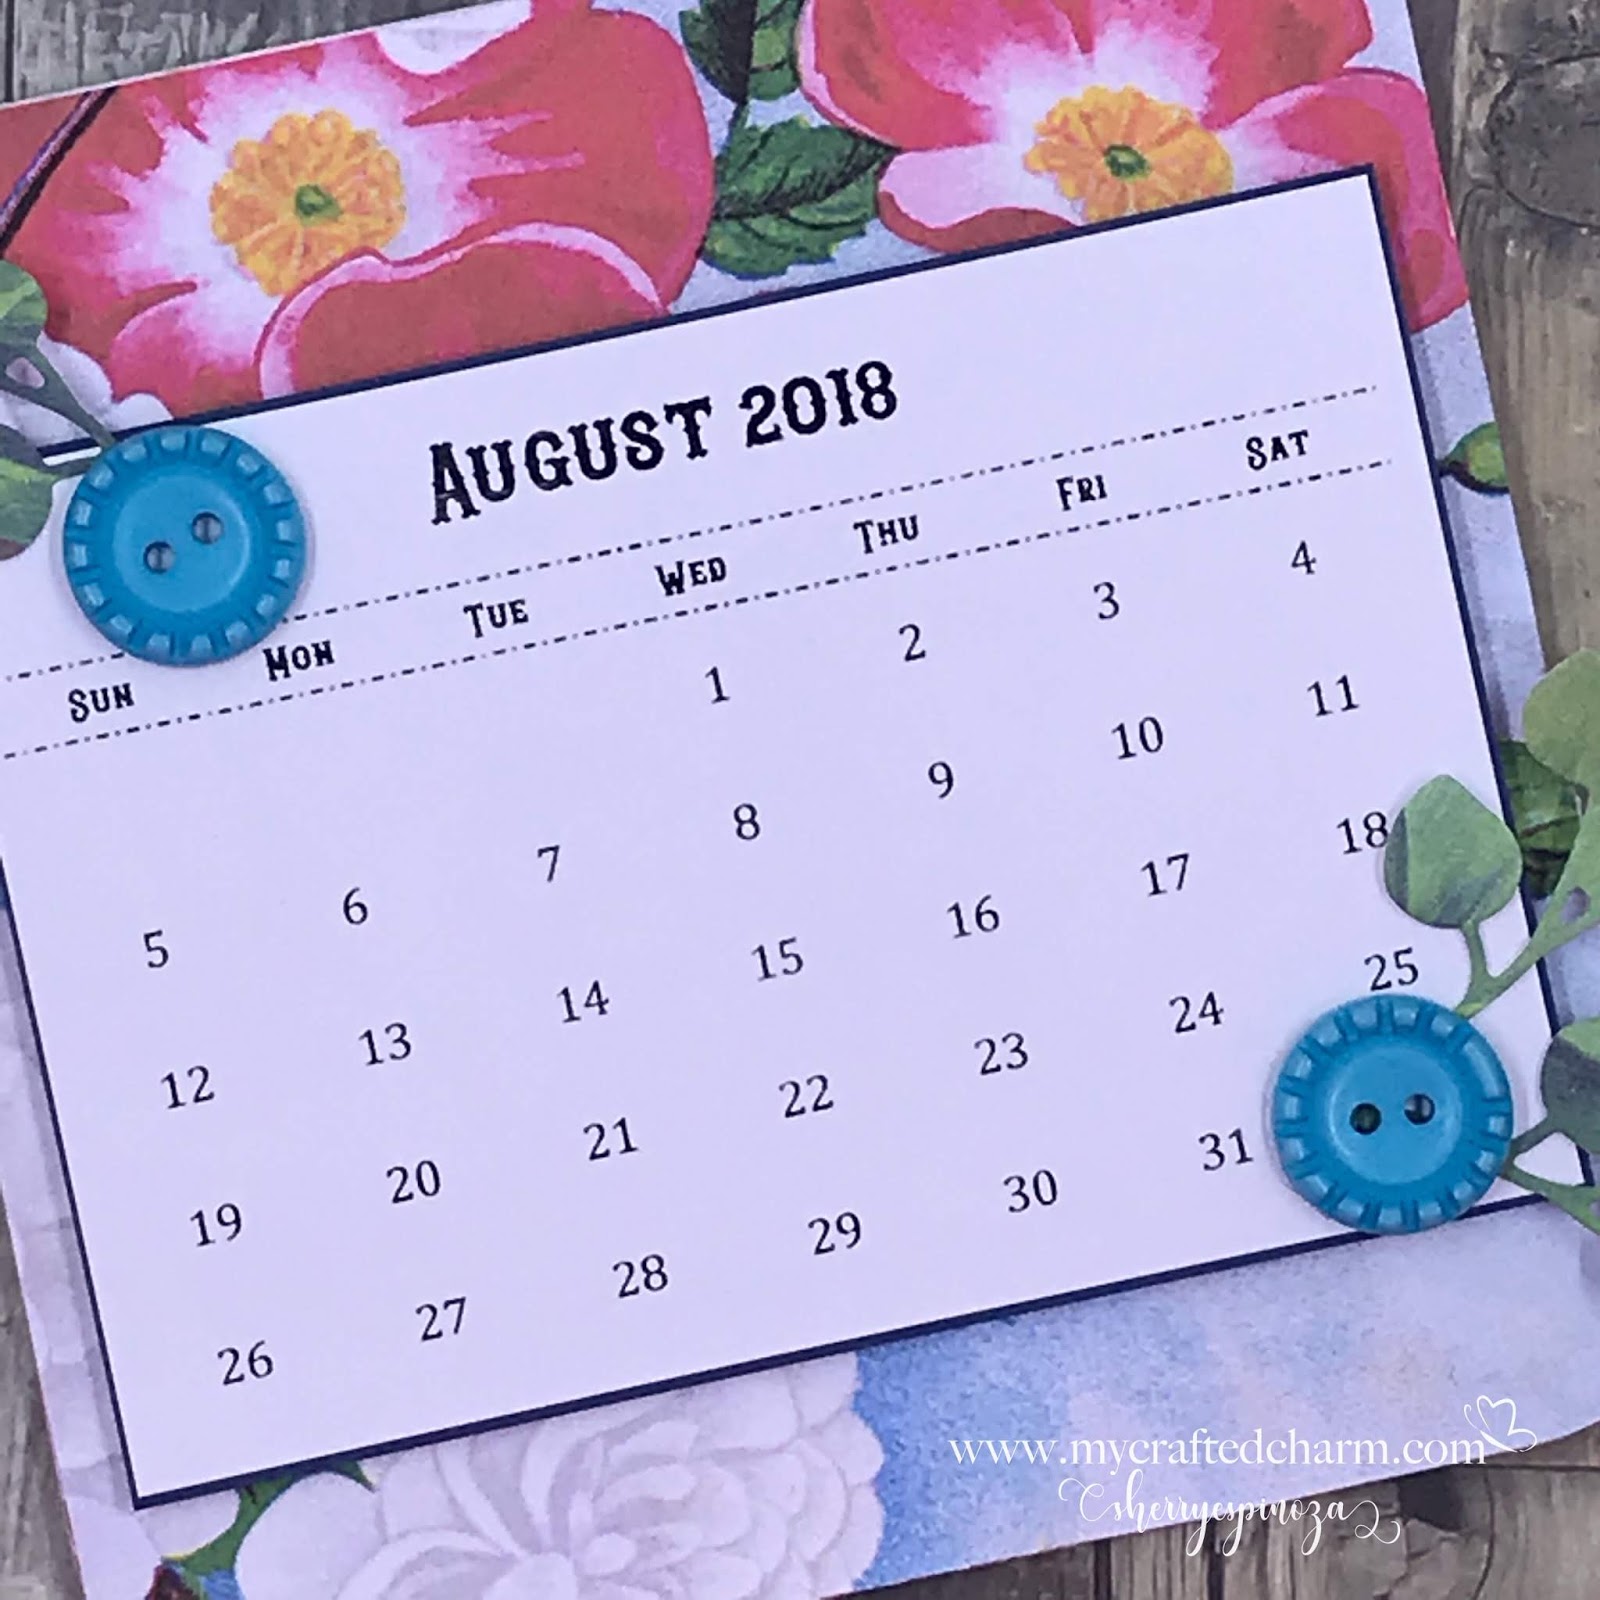 crafted-charm-designs-august-calendar-free-printable